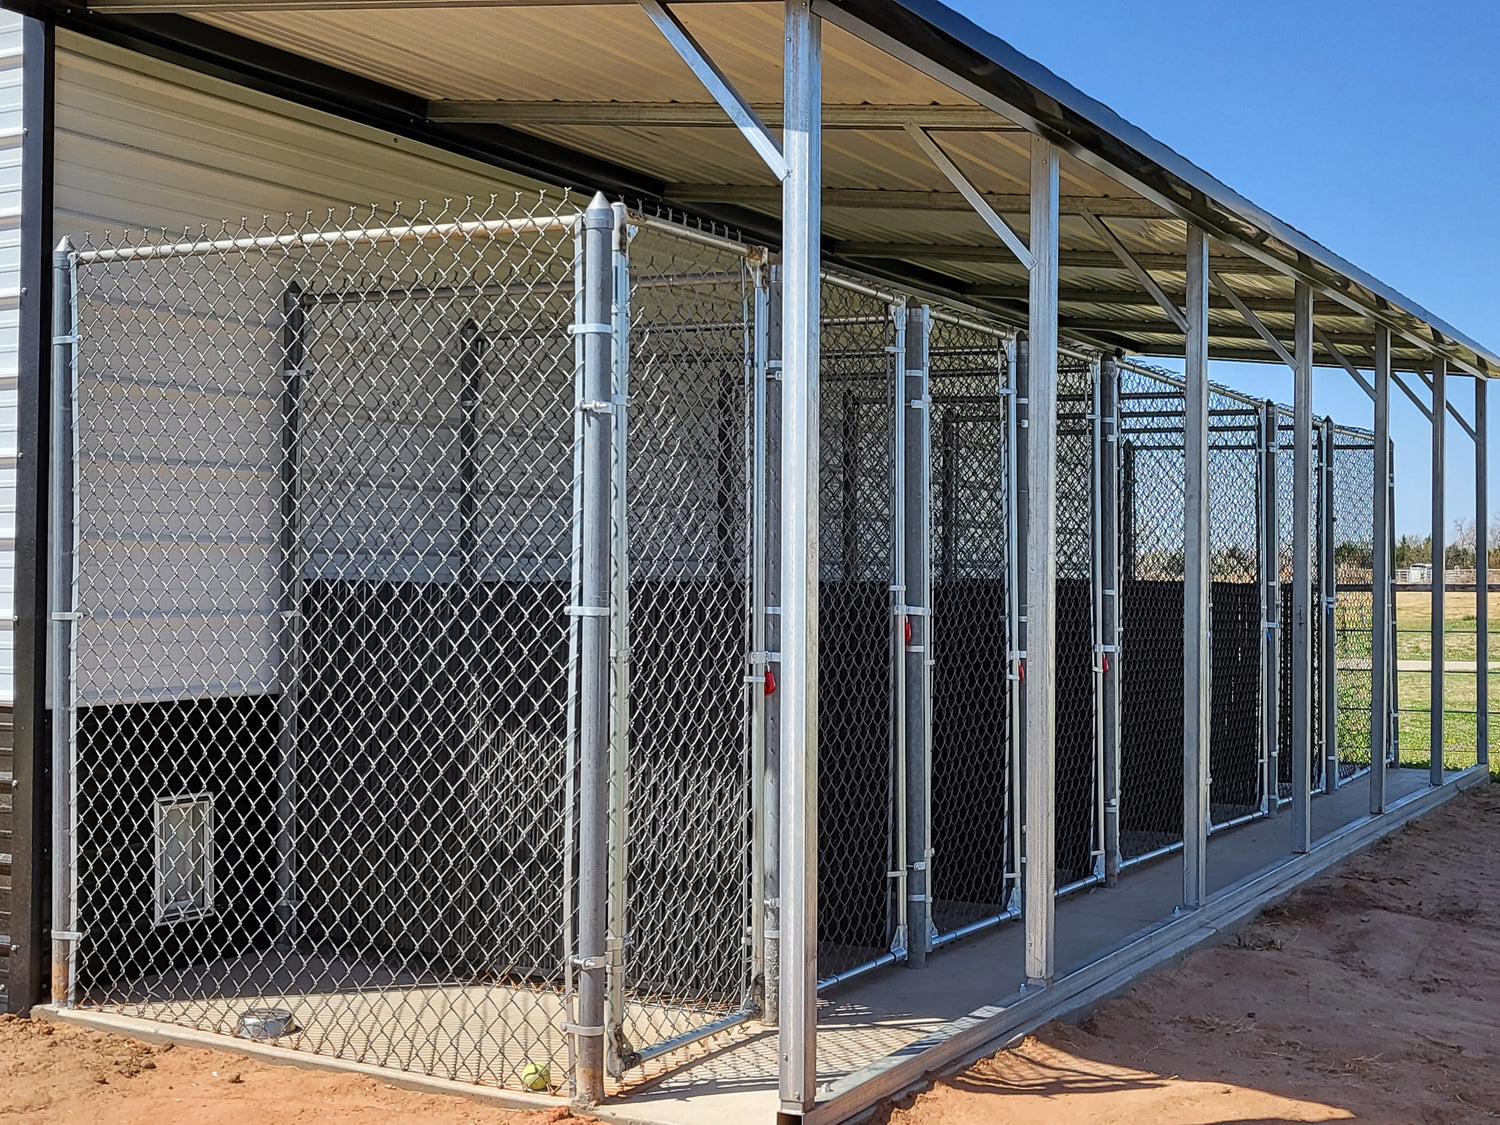 Each kennel has a covering over it so that the dogs can lay out on the concrete and enjoy the environment.